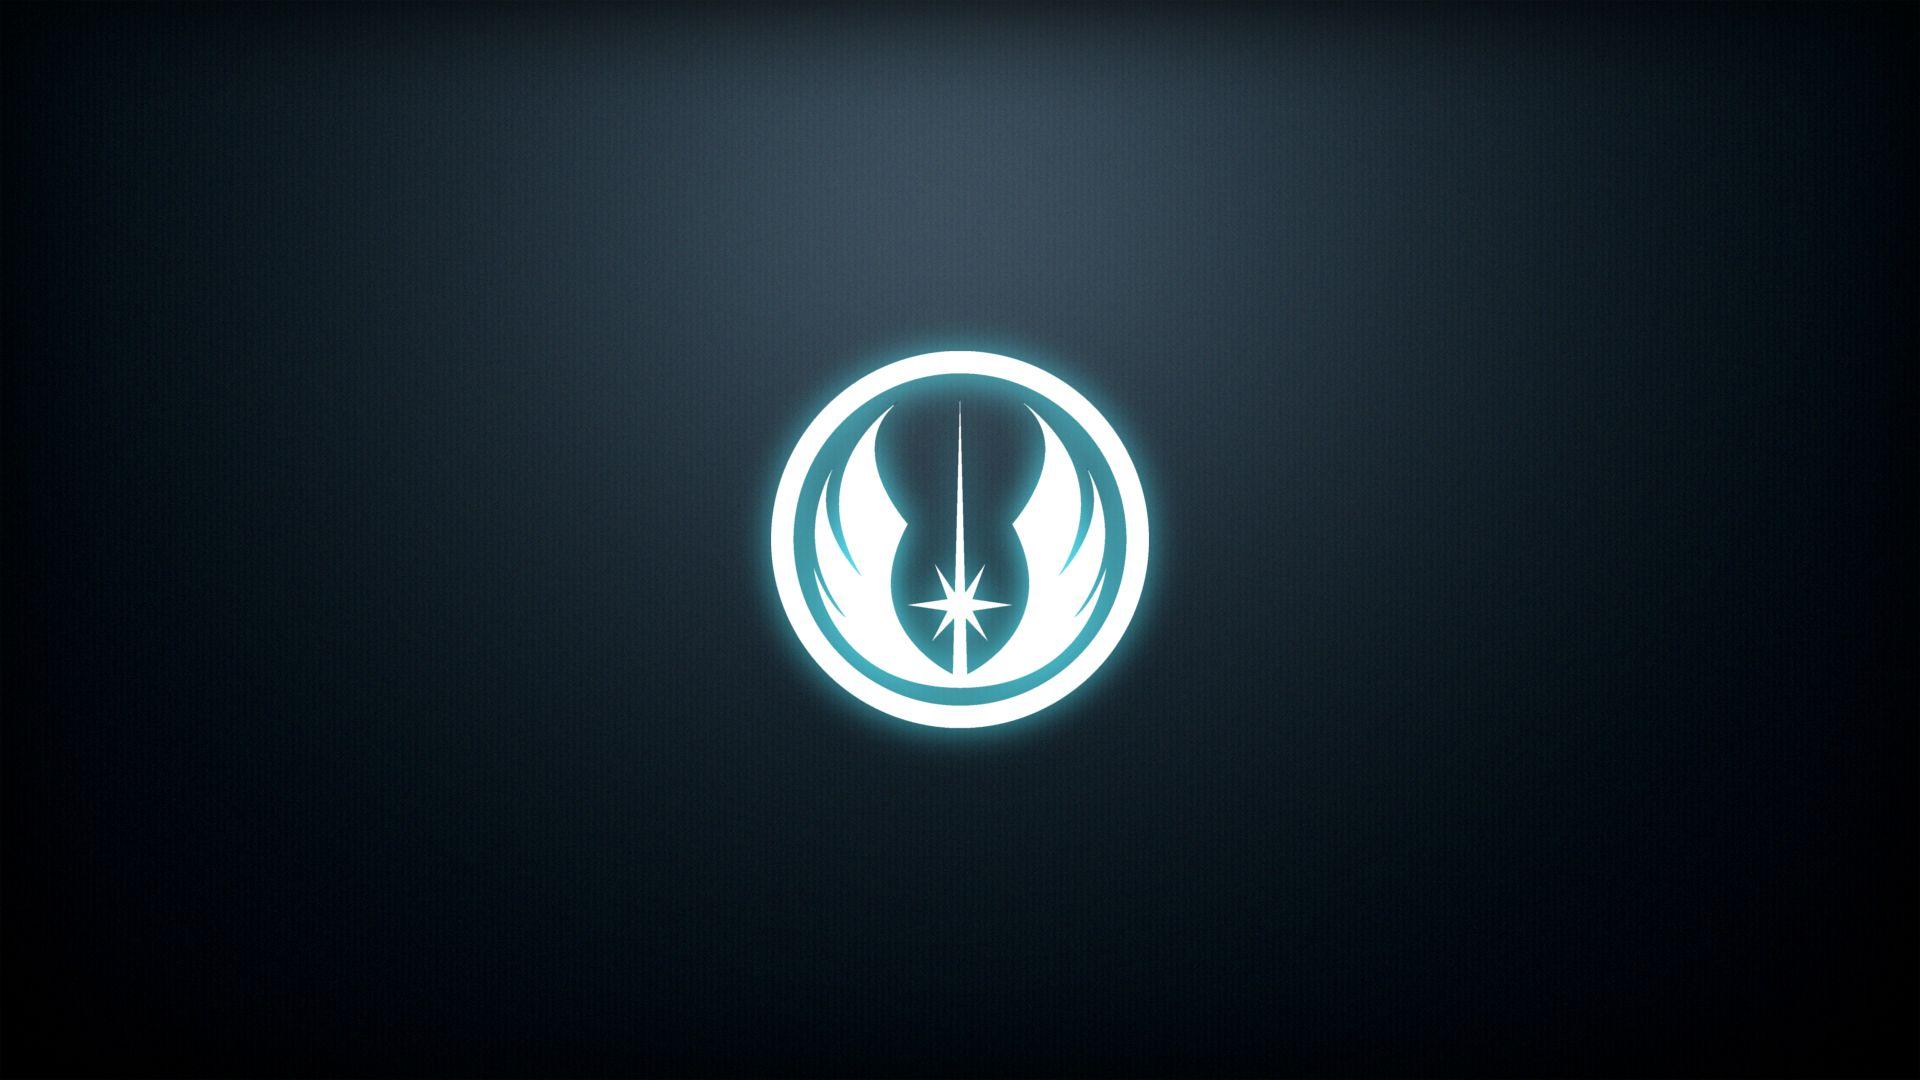 A wallpaper you guys might like. The Jedi Order emblem. I'll do a